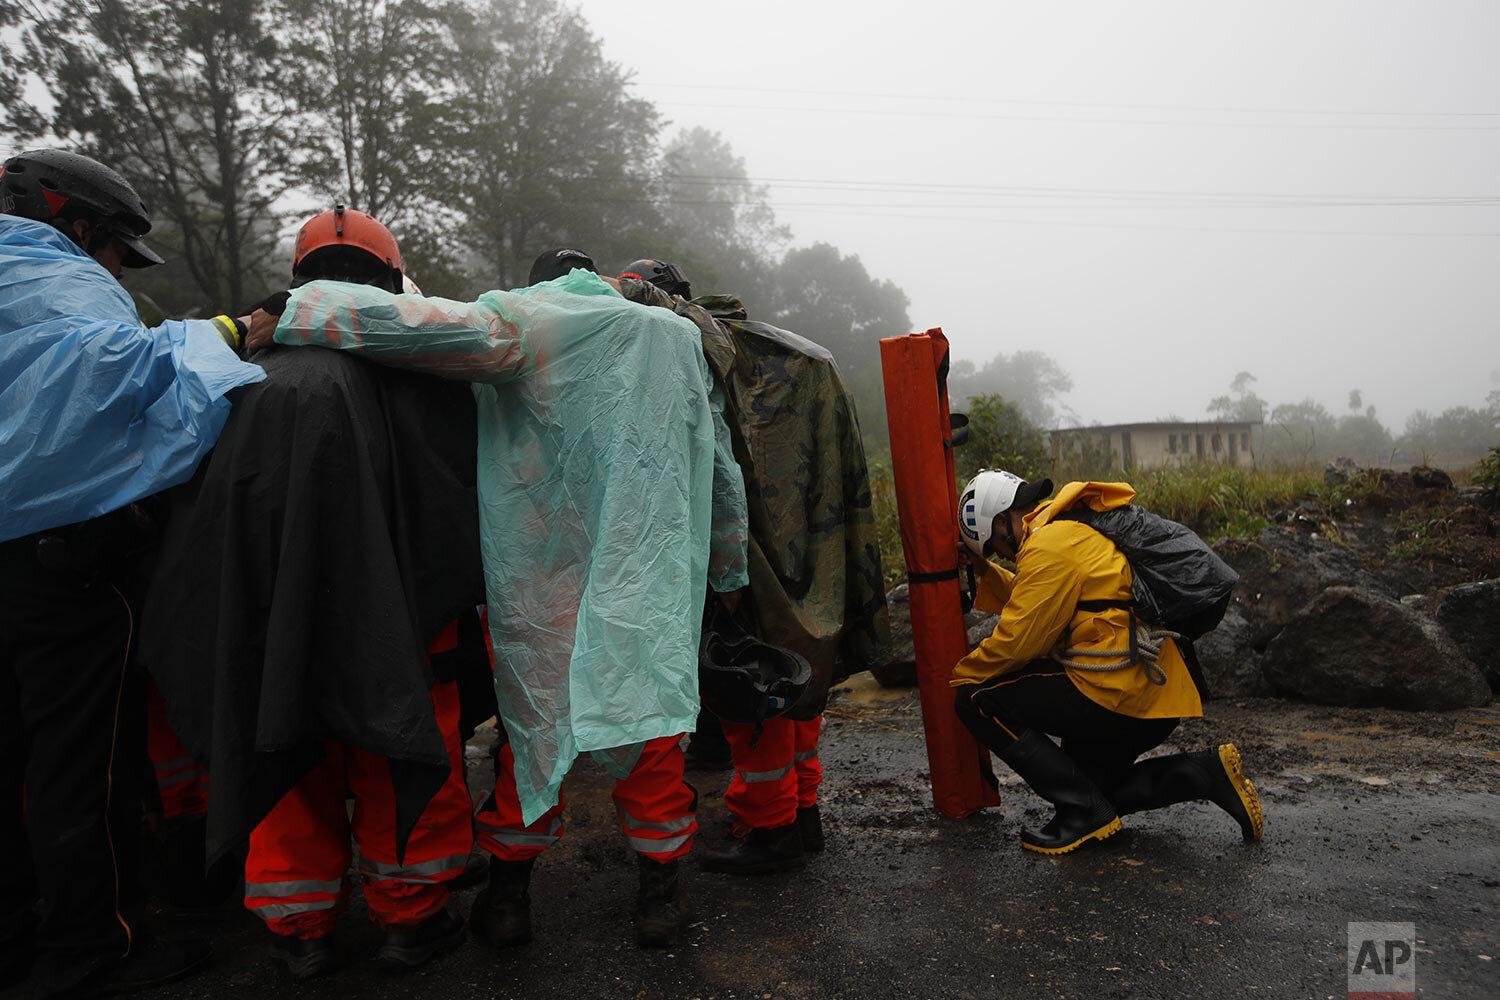  Volunteer firefighters huddle in prayer before beginning a search and rescue operation for people believed buried by a rain-fueled landslide in San Cristobal Verapaz, Saturday, Nov. 7, 2020, in the aftermath of Hurricane Eta. (AP Photo/Moises Castil